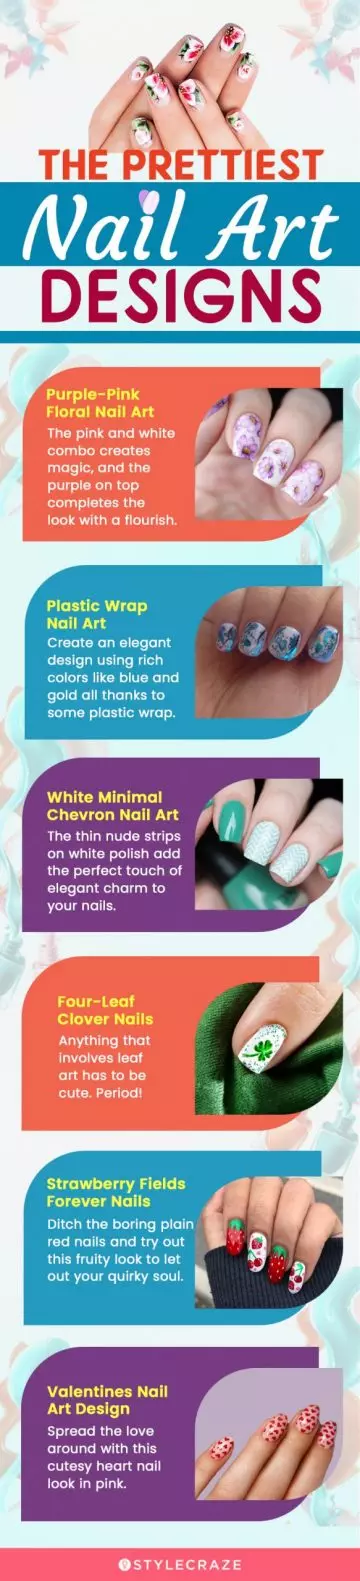 the prettiest nail art designs (infographic)